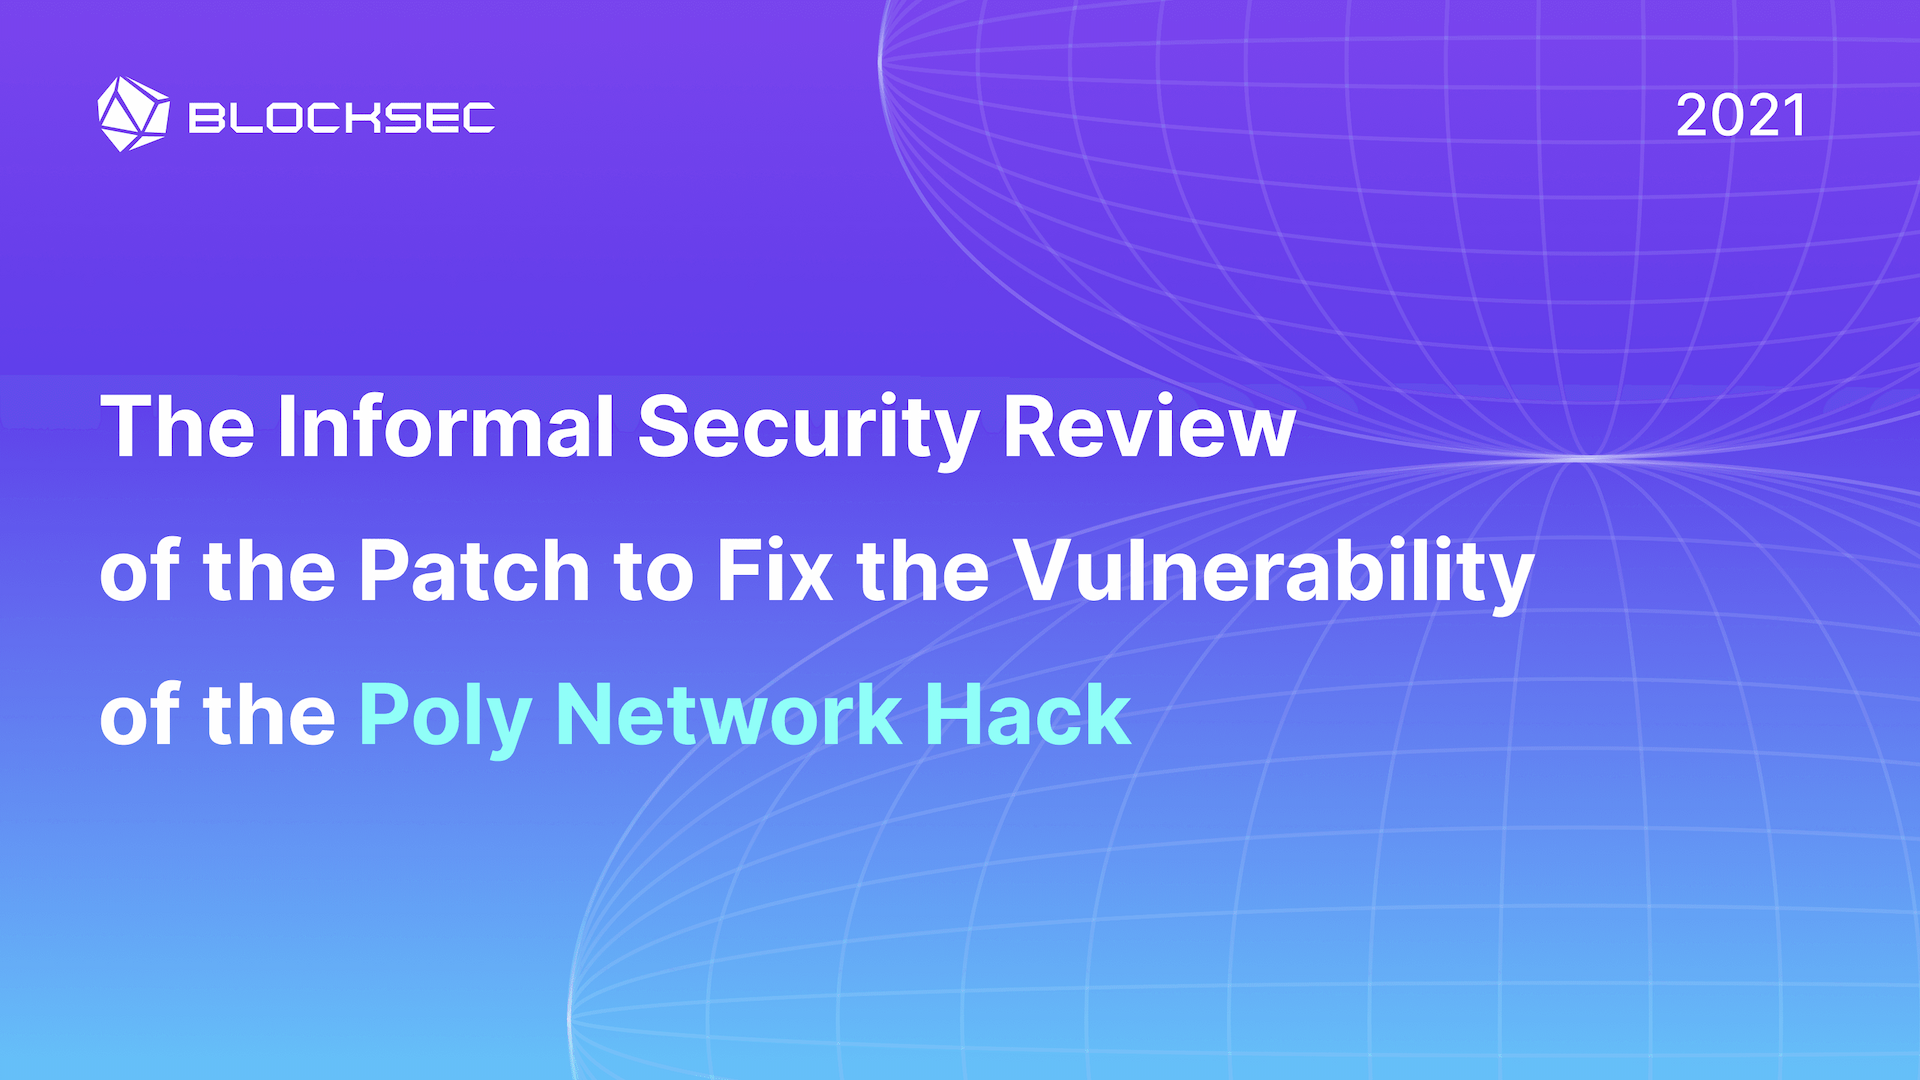 The Informal Security Review of the Patch to Fix the Vulnerability of the Poly Network Hack